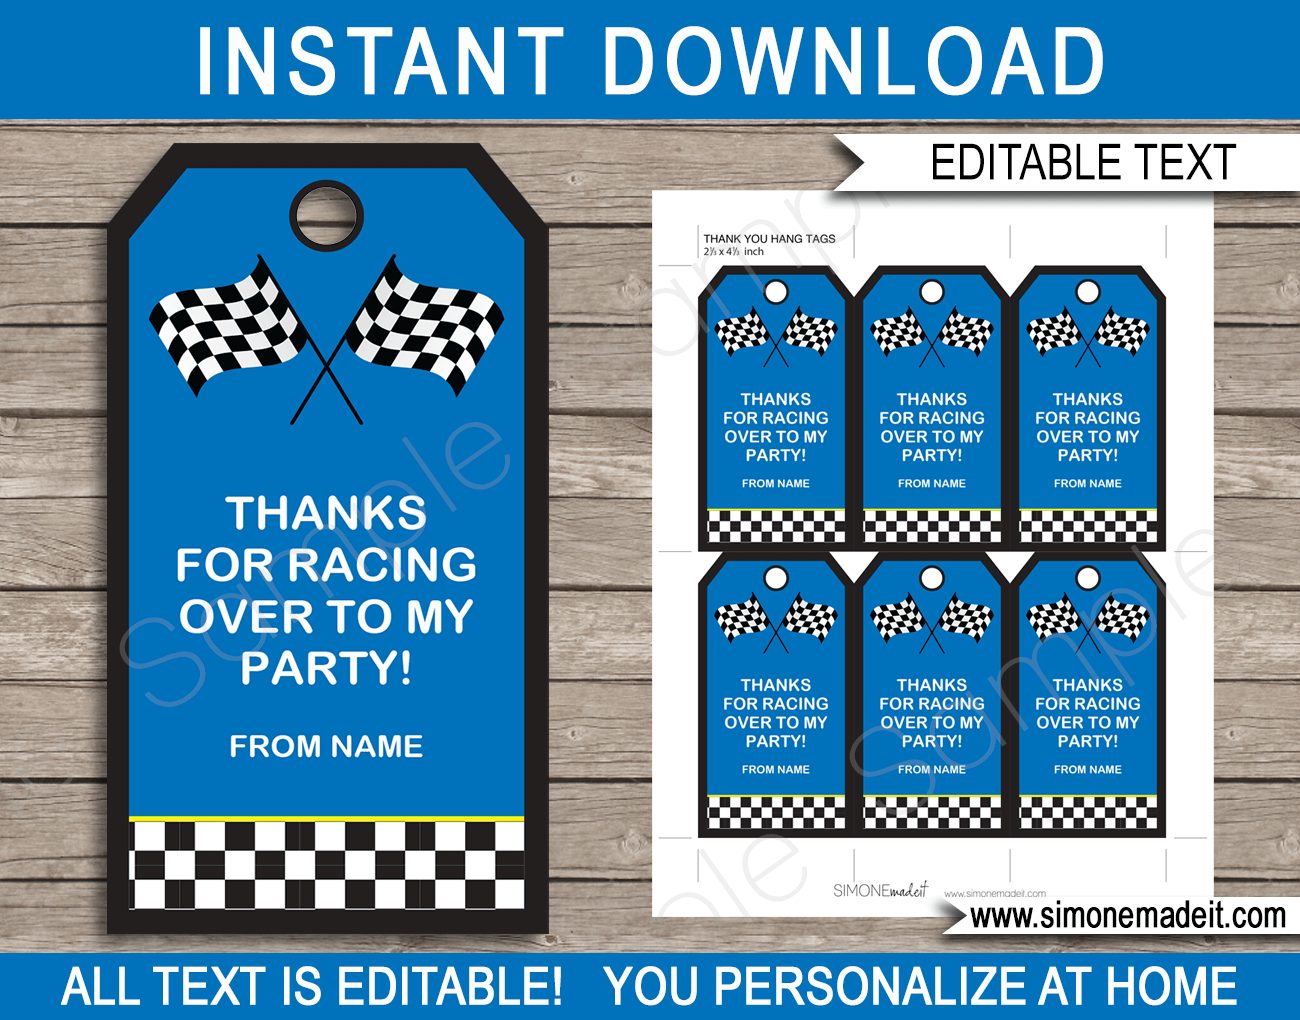 Blue Race Car Birthday Party Favor Tags | Thank You Tags | Editable DIY Template | $3.00 INSTANT DOWNLOAD via SIMONEmadeit.com